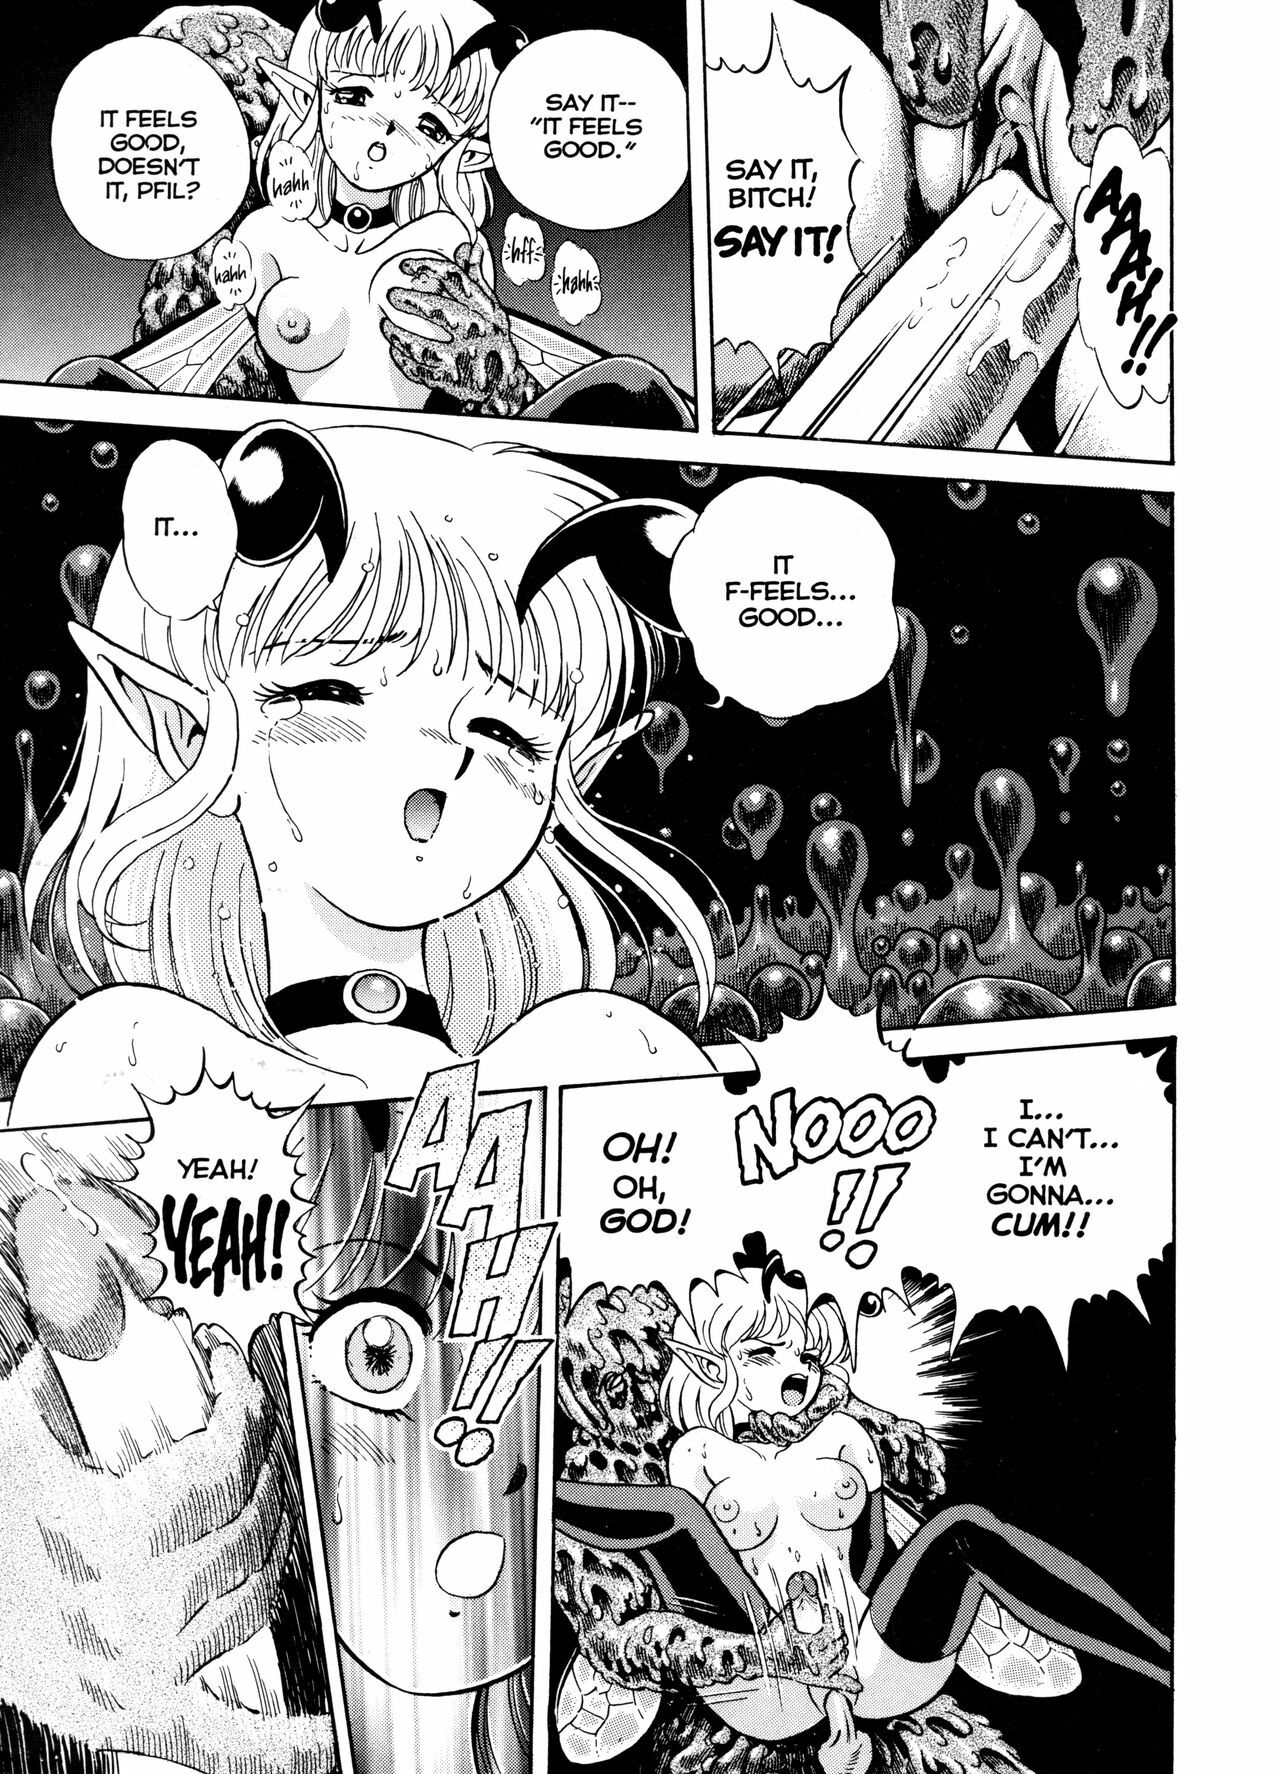 [Kondom] The New Bondage Fairies Issue 12 [ENG][Hi-Res] page 14 full